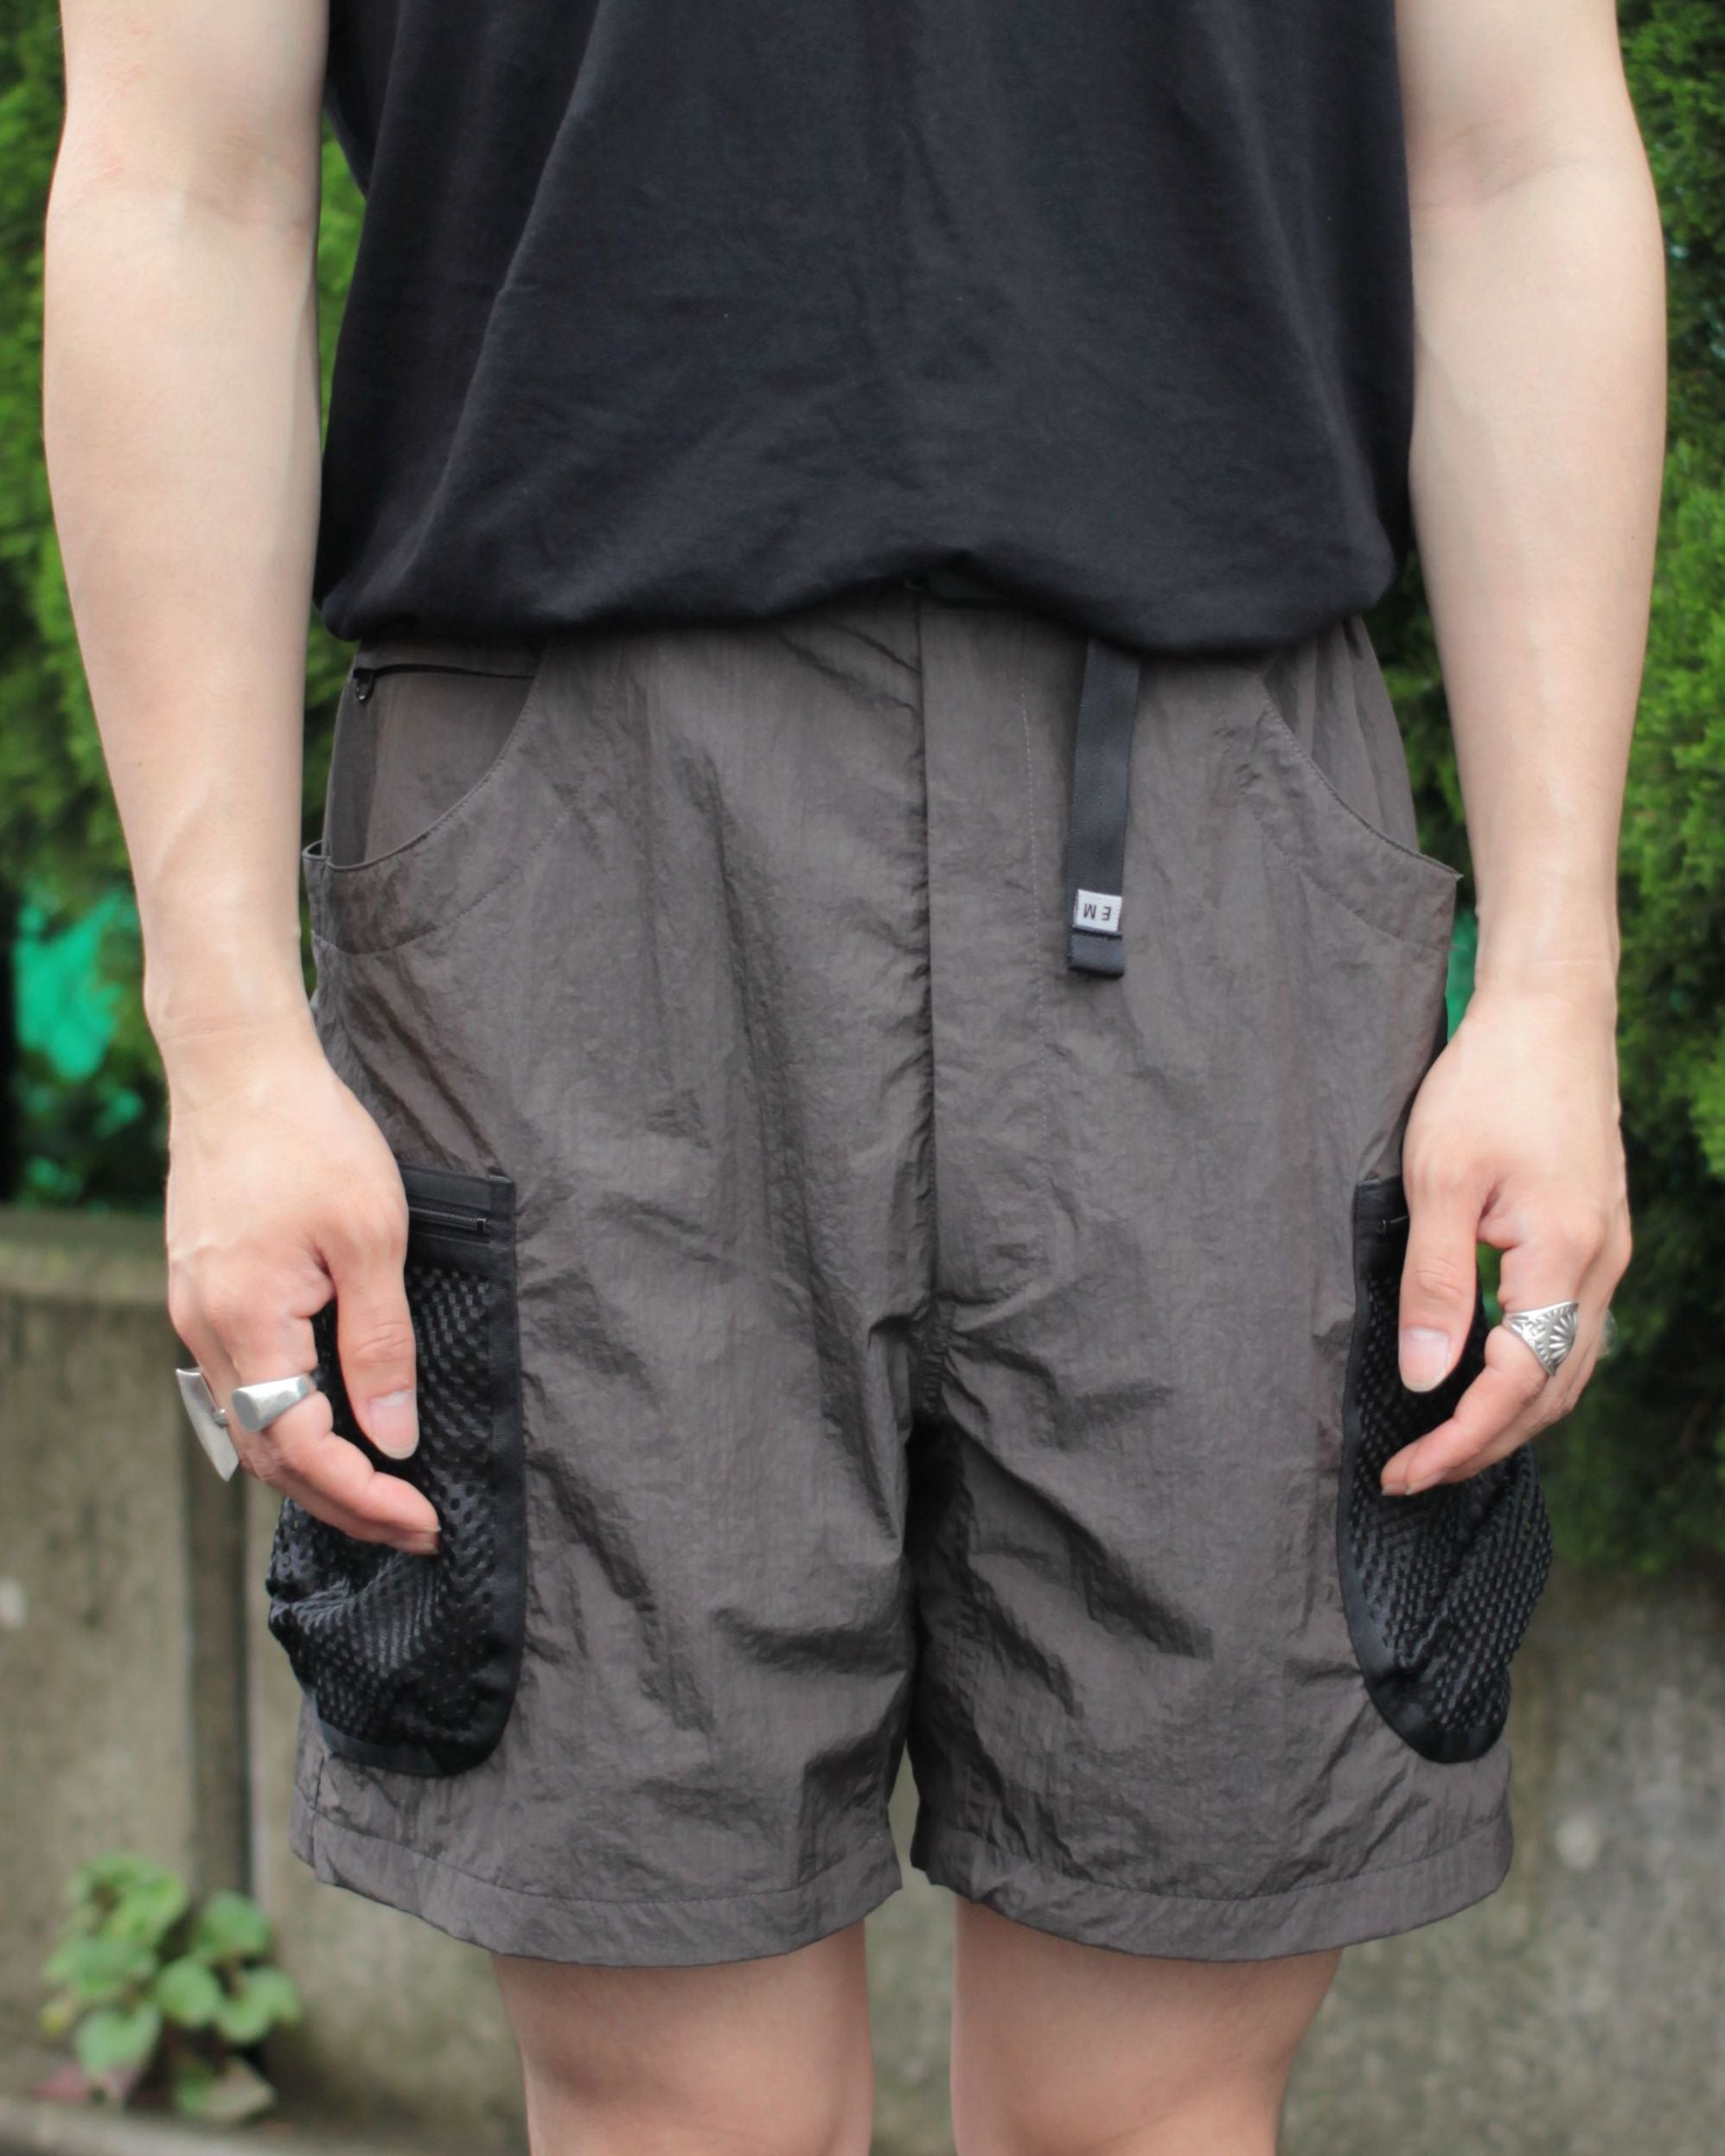 ENDS and MEANS（エンズアンドミーンズ）Utillity Shorts